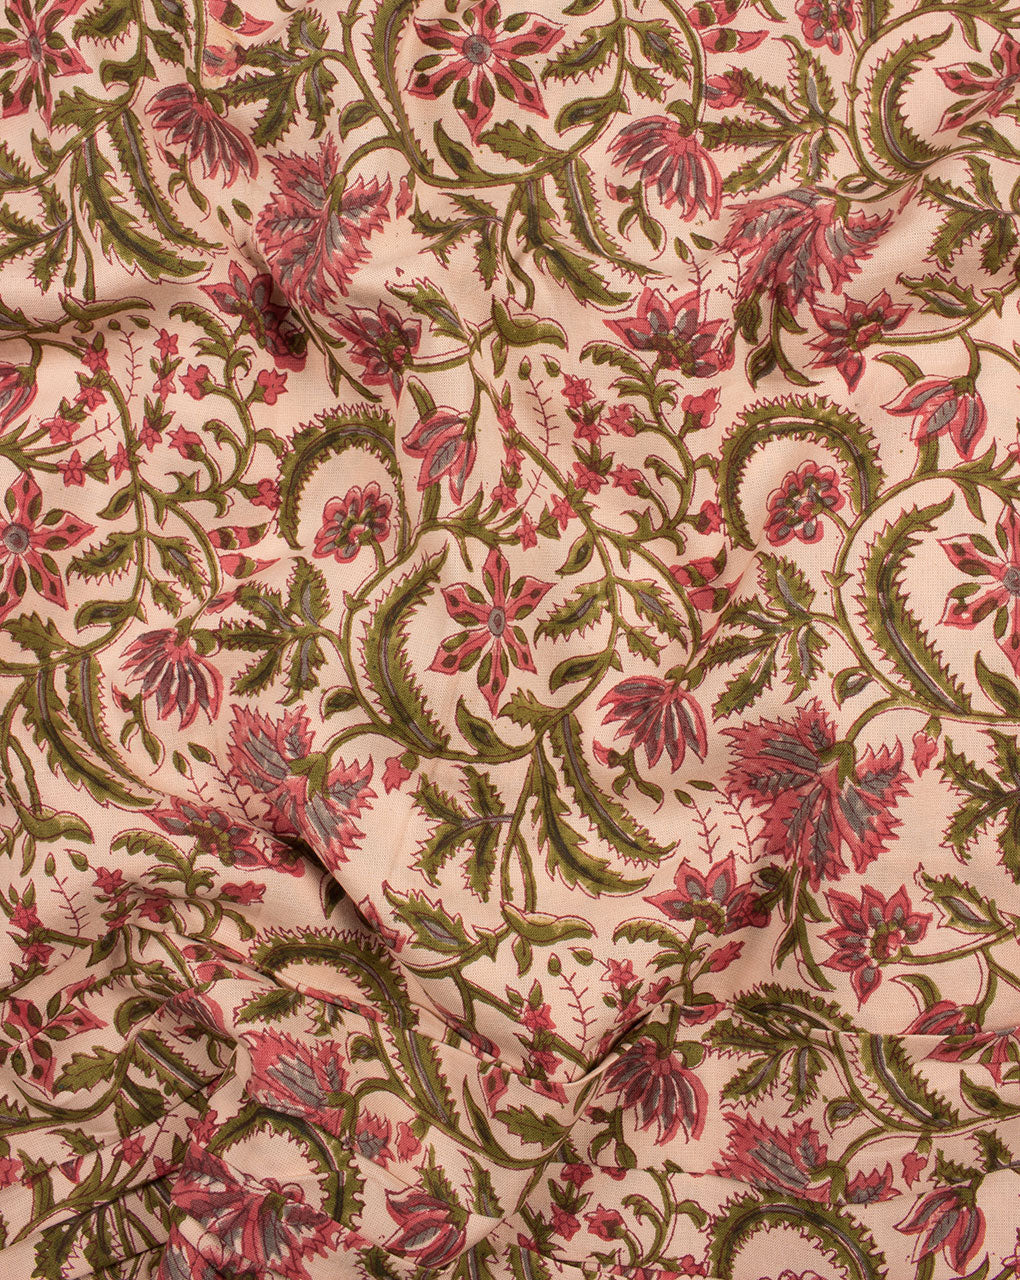 Peach Green Floral Hand Block Certified Antimicrobial Rayon Fabric - Fabriclore.com